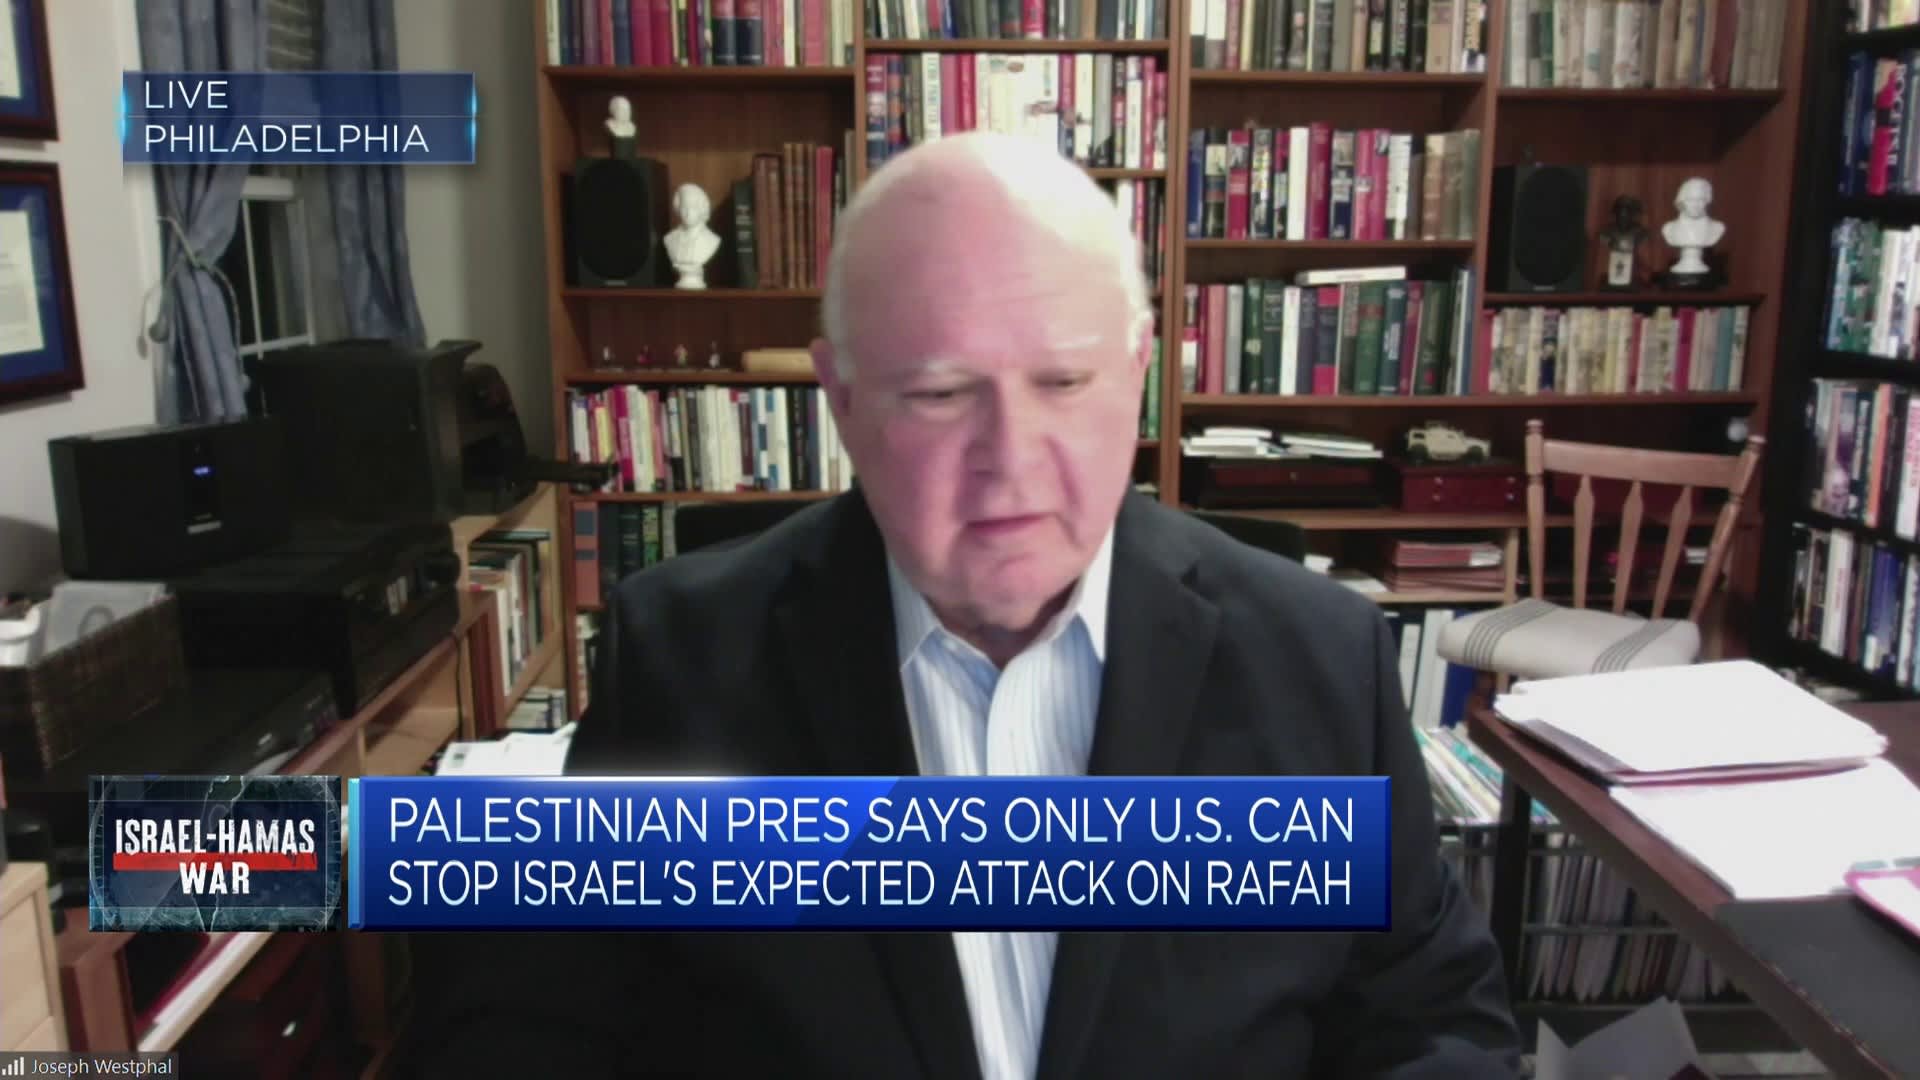 Former U.S. diplomatdiscusses the outlook for Gaza cease-fire talks [Video]